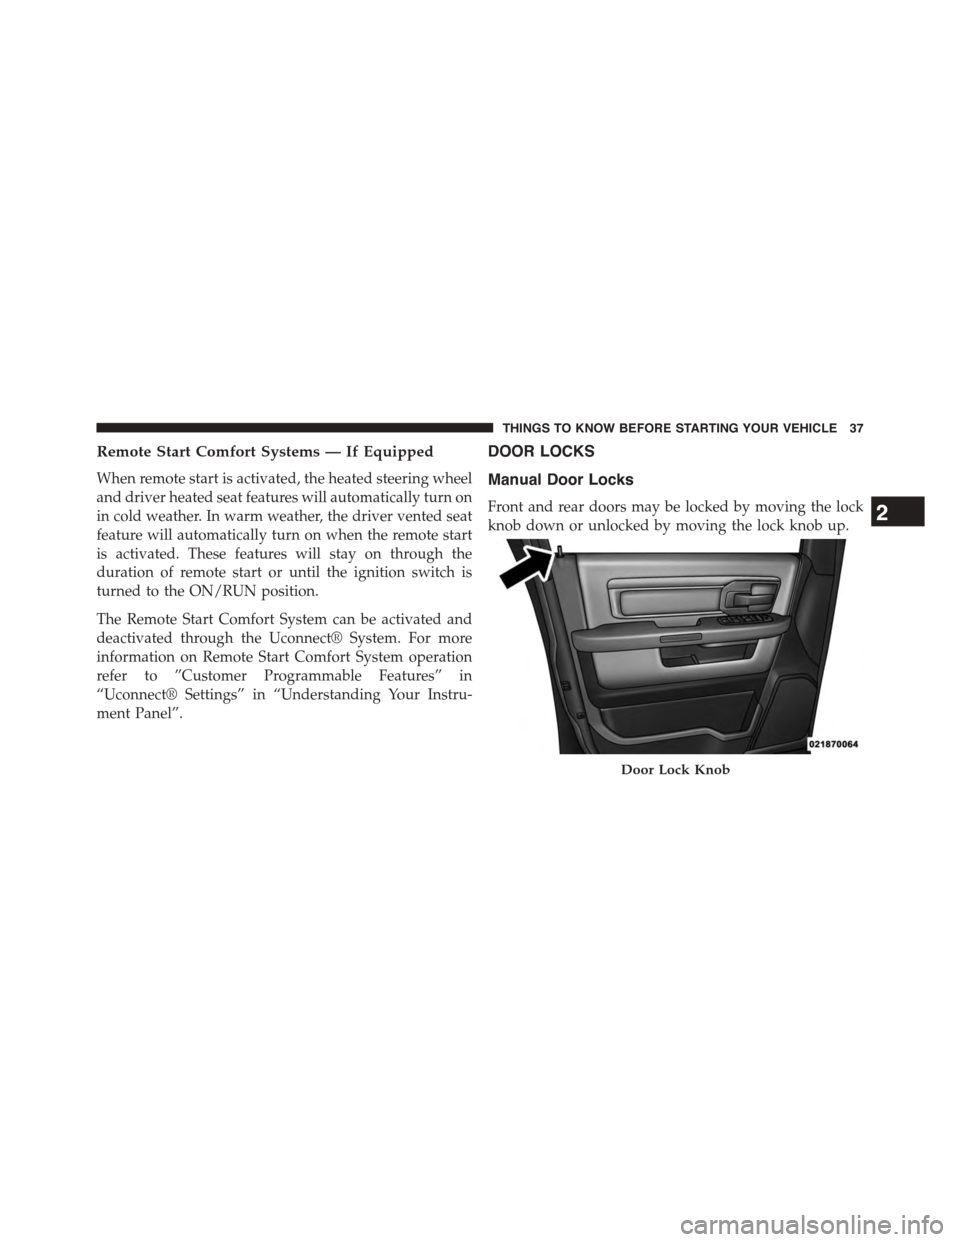 Ram 1500 2015 Owners Guide Remote Start Comfort Systems — If Equipped
When remote start is activated, the heated steering wheel
and driver heated seat features will automatically turn on
in cold weather. In warm weather, the 